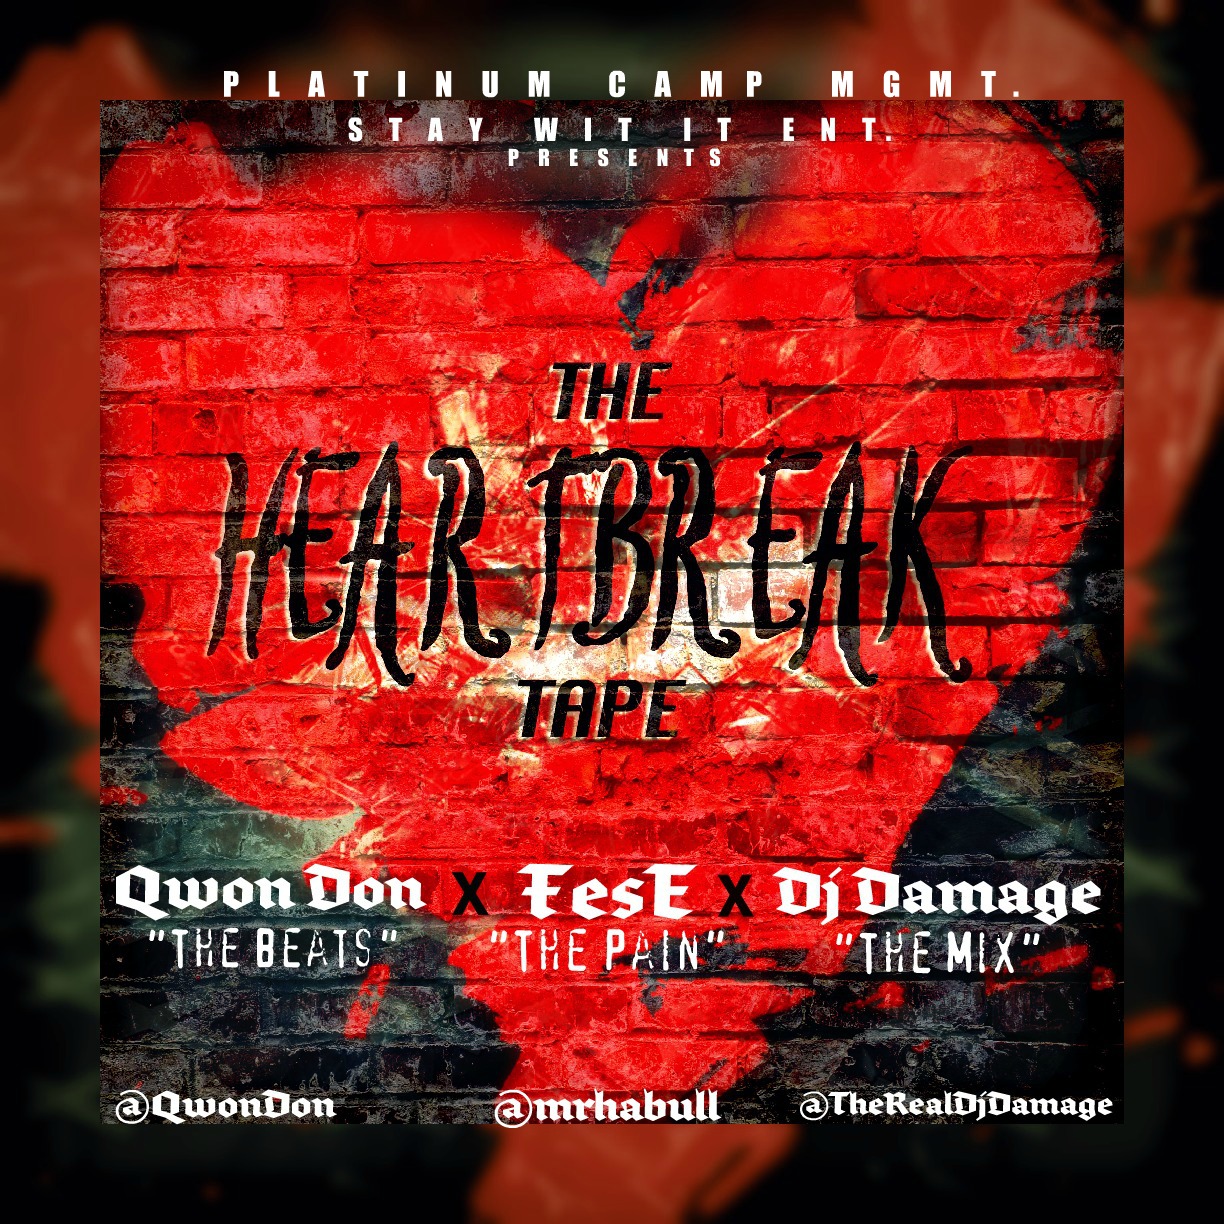 The-Heartbreak-Front-Cover-PLATINUM Fese (@mrhabull) - The HeartBreak Tape EP (Hosted by @TheRealDJDamage)  